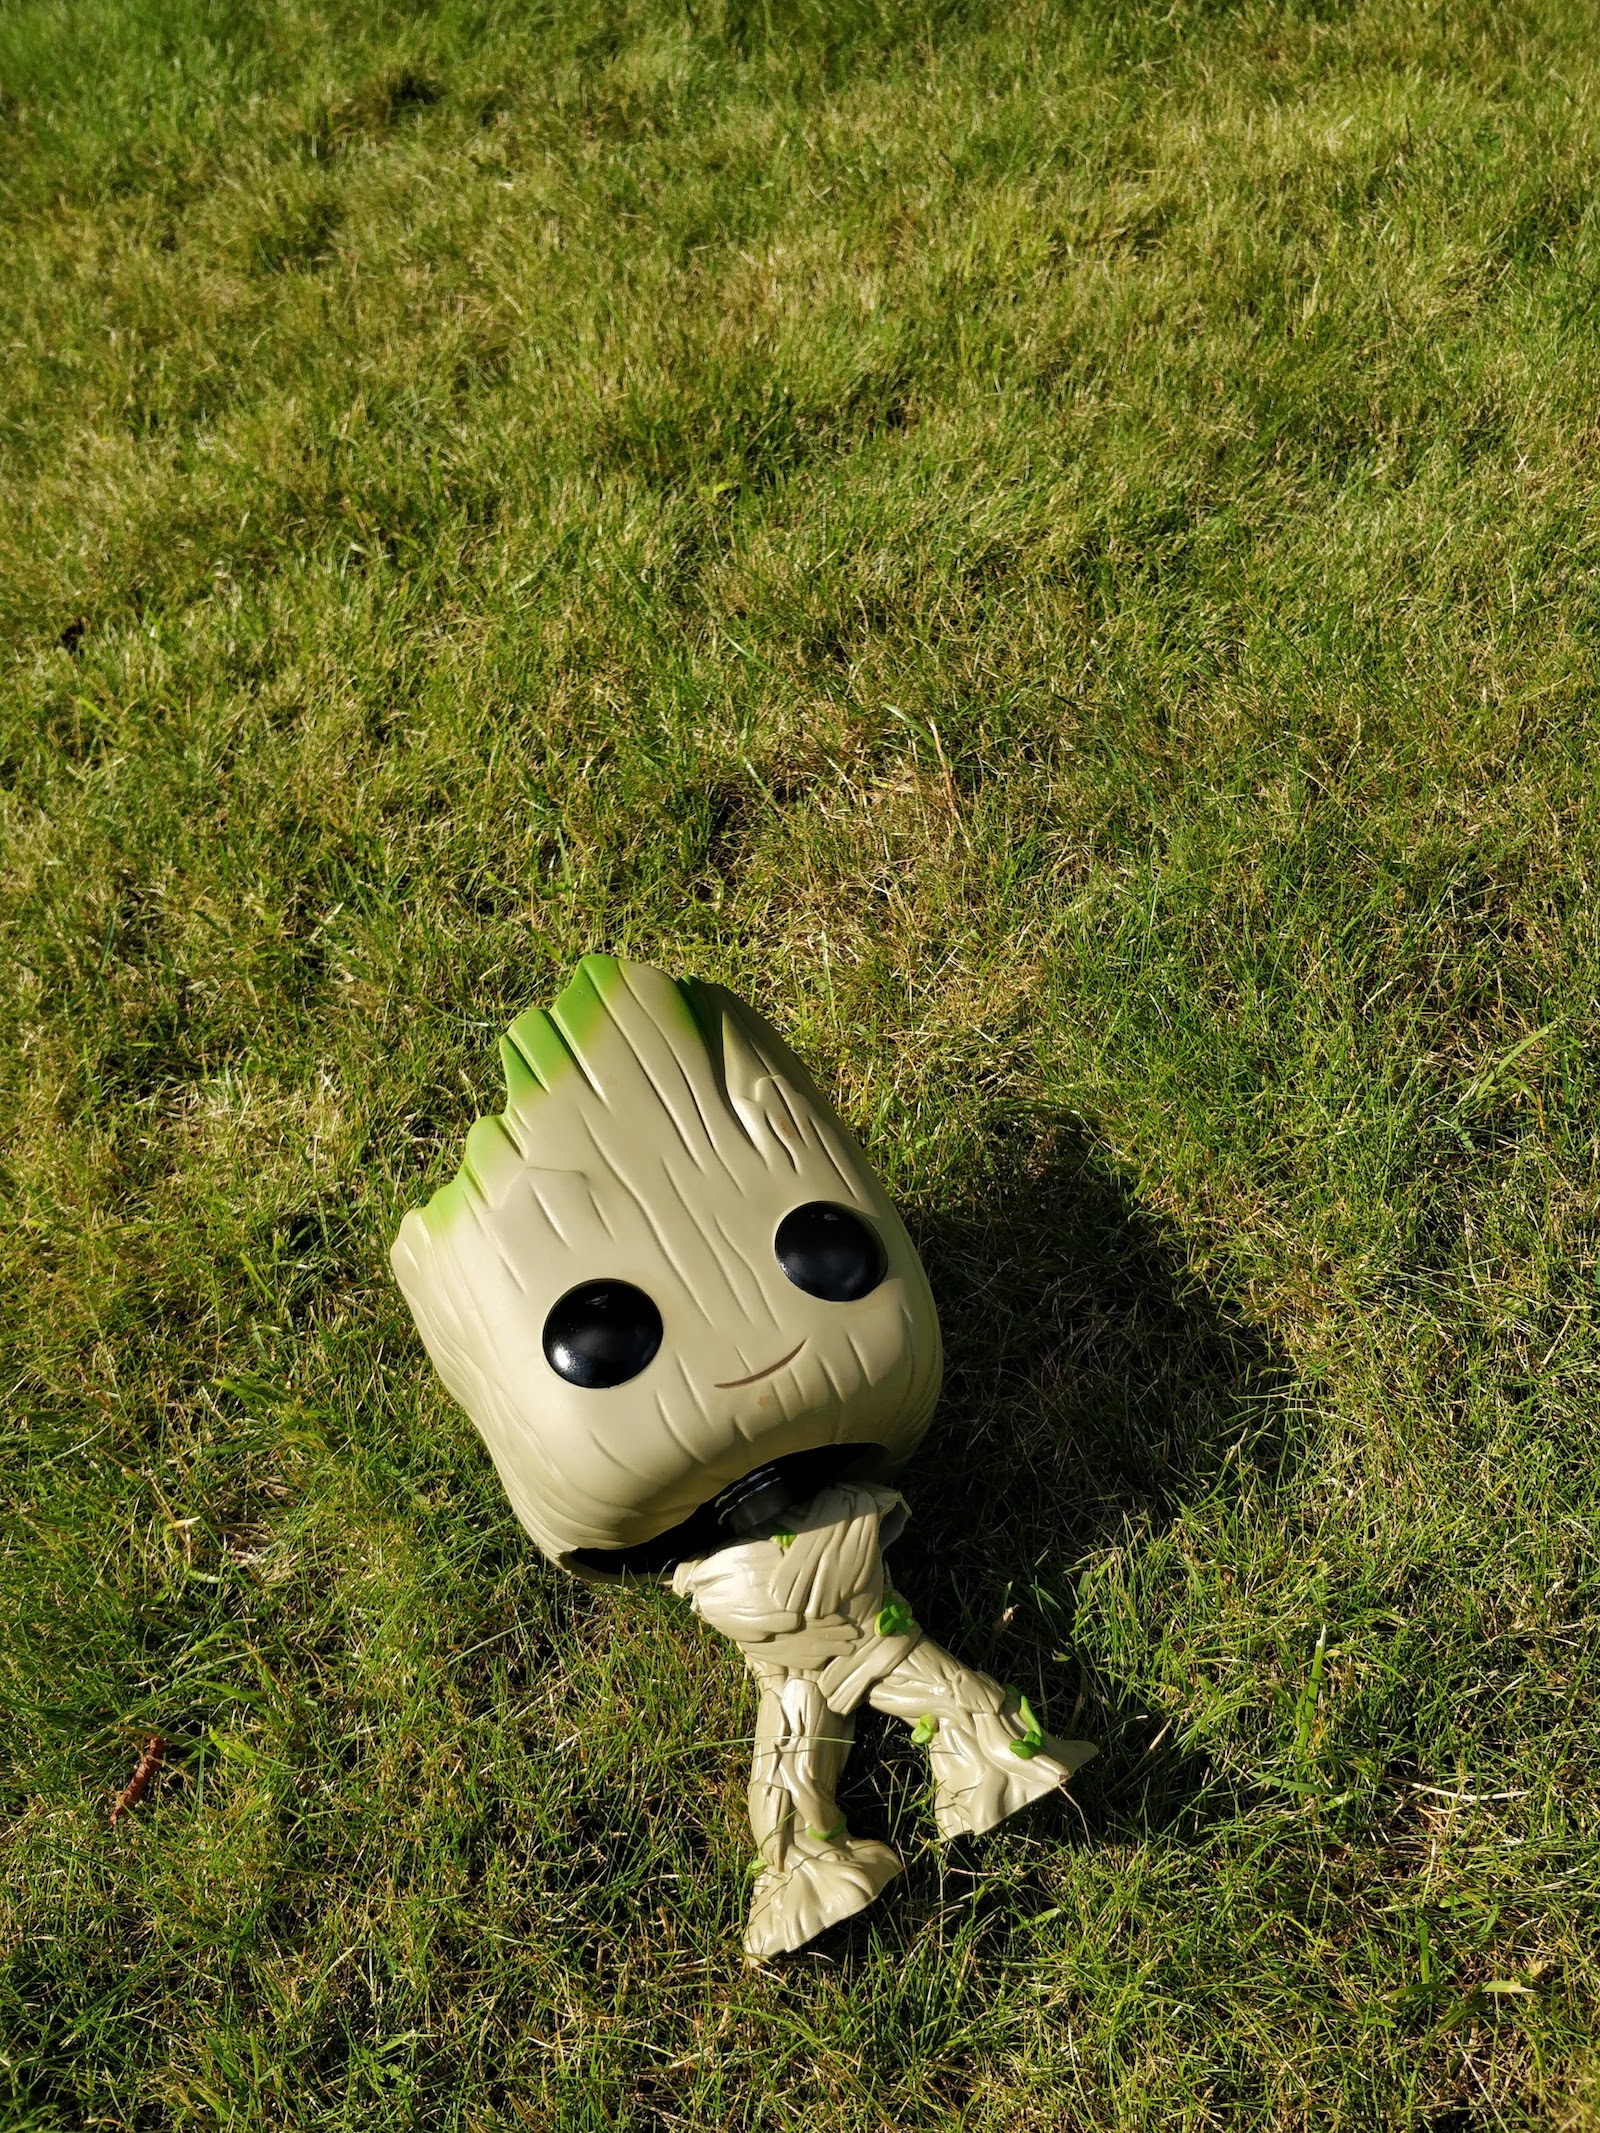 Groot … relaxing in the grass